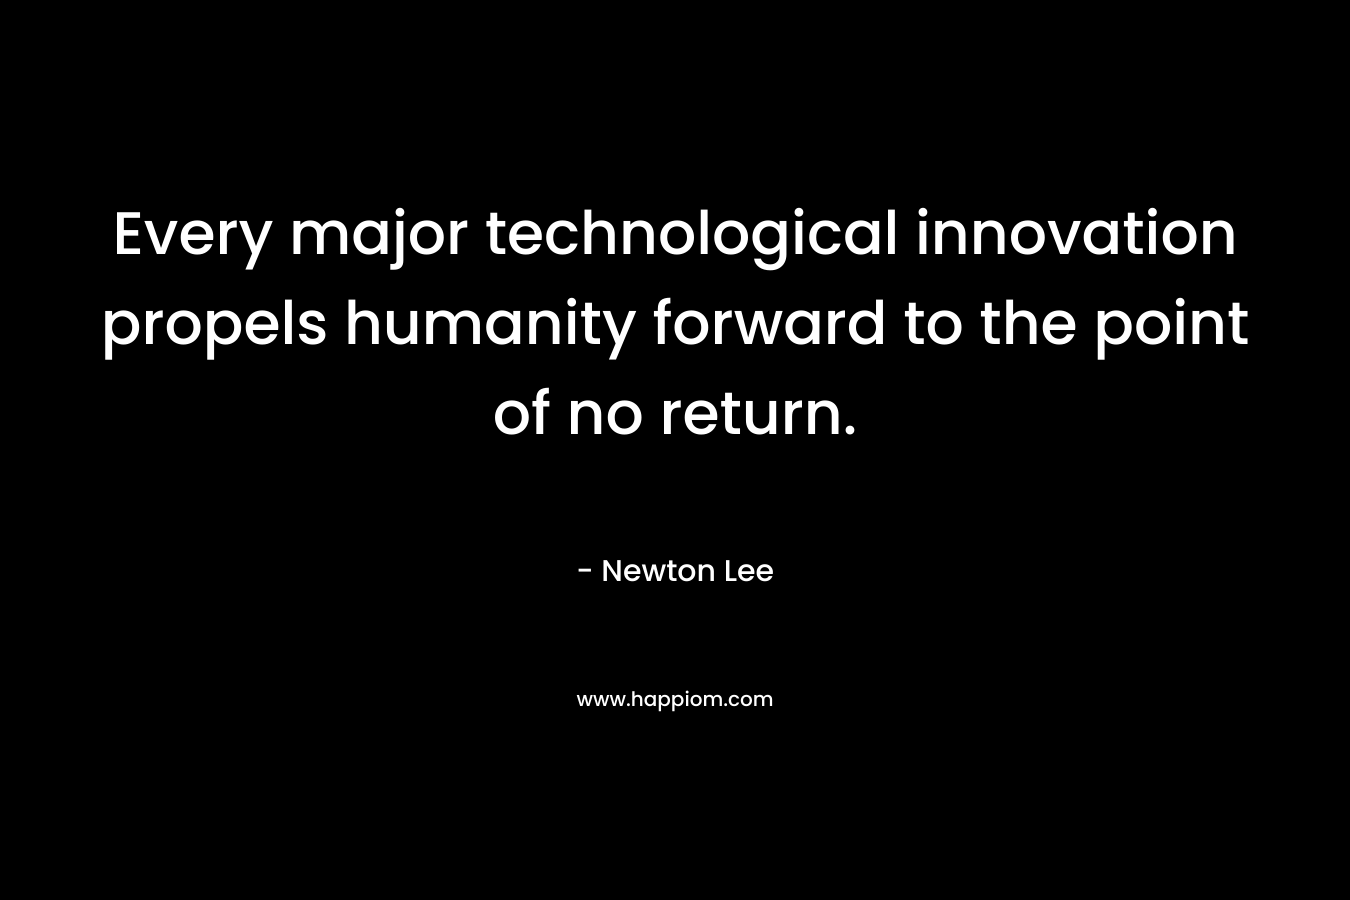 Every major technological innovation propels humanity forward to the point of no return. – Newton Lee